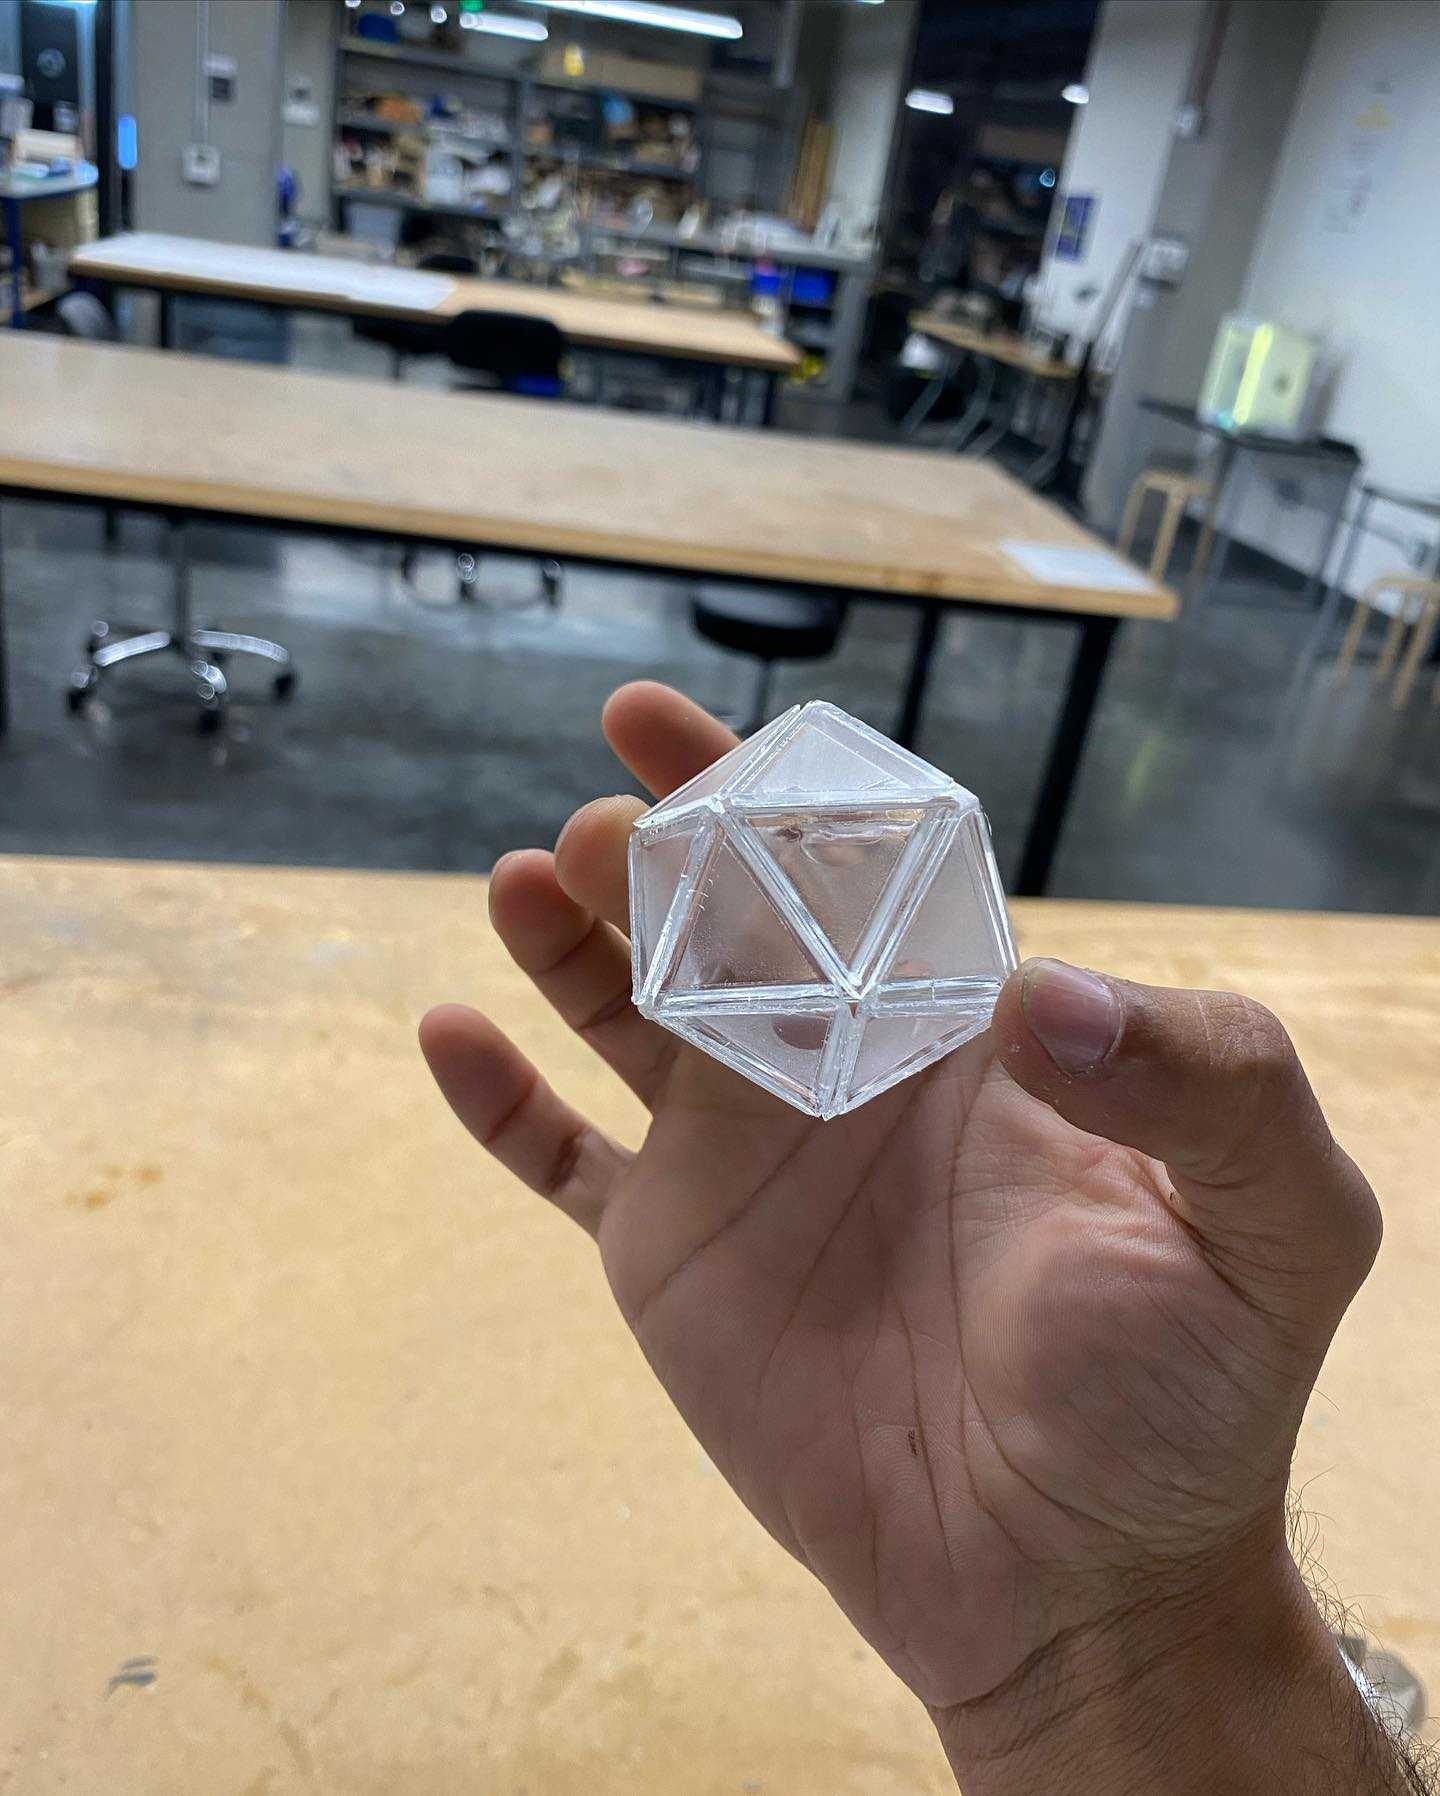 Inspired by a fellow laser cutter enthusiast at the shop building some tessellated sculptures, I started experimenting with defocusing the laser cutter to make foldable structures. A few hours of iteration later, I had a foldable icosahedron! One day this will make complex polyhedral infinity mirror sculptures much easier to put together.